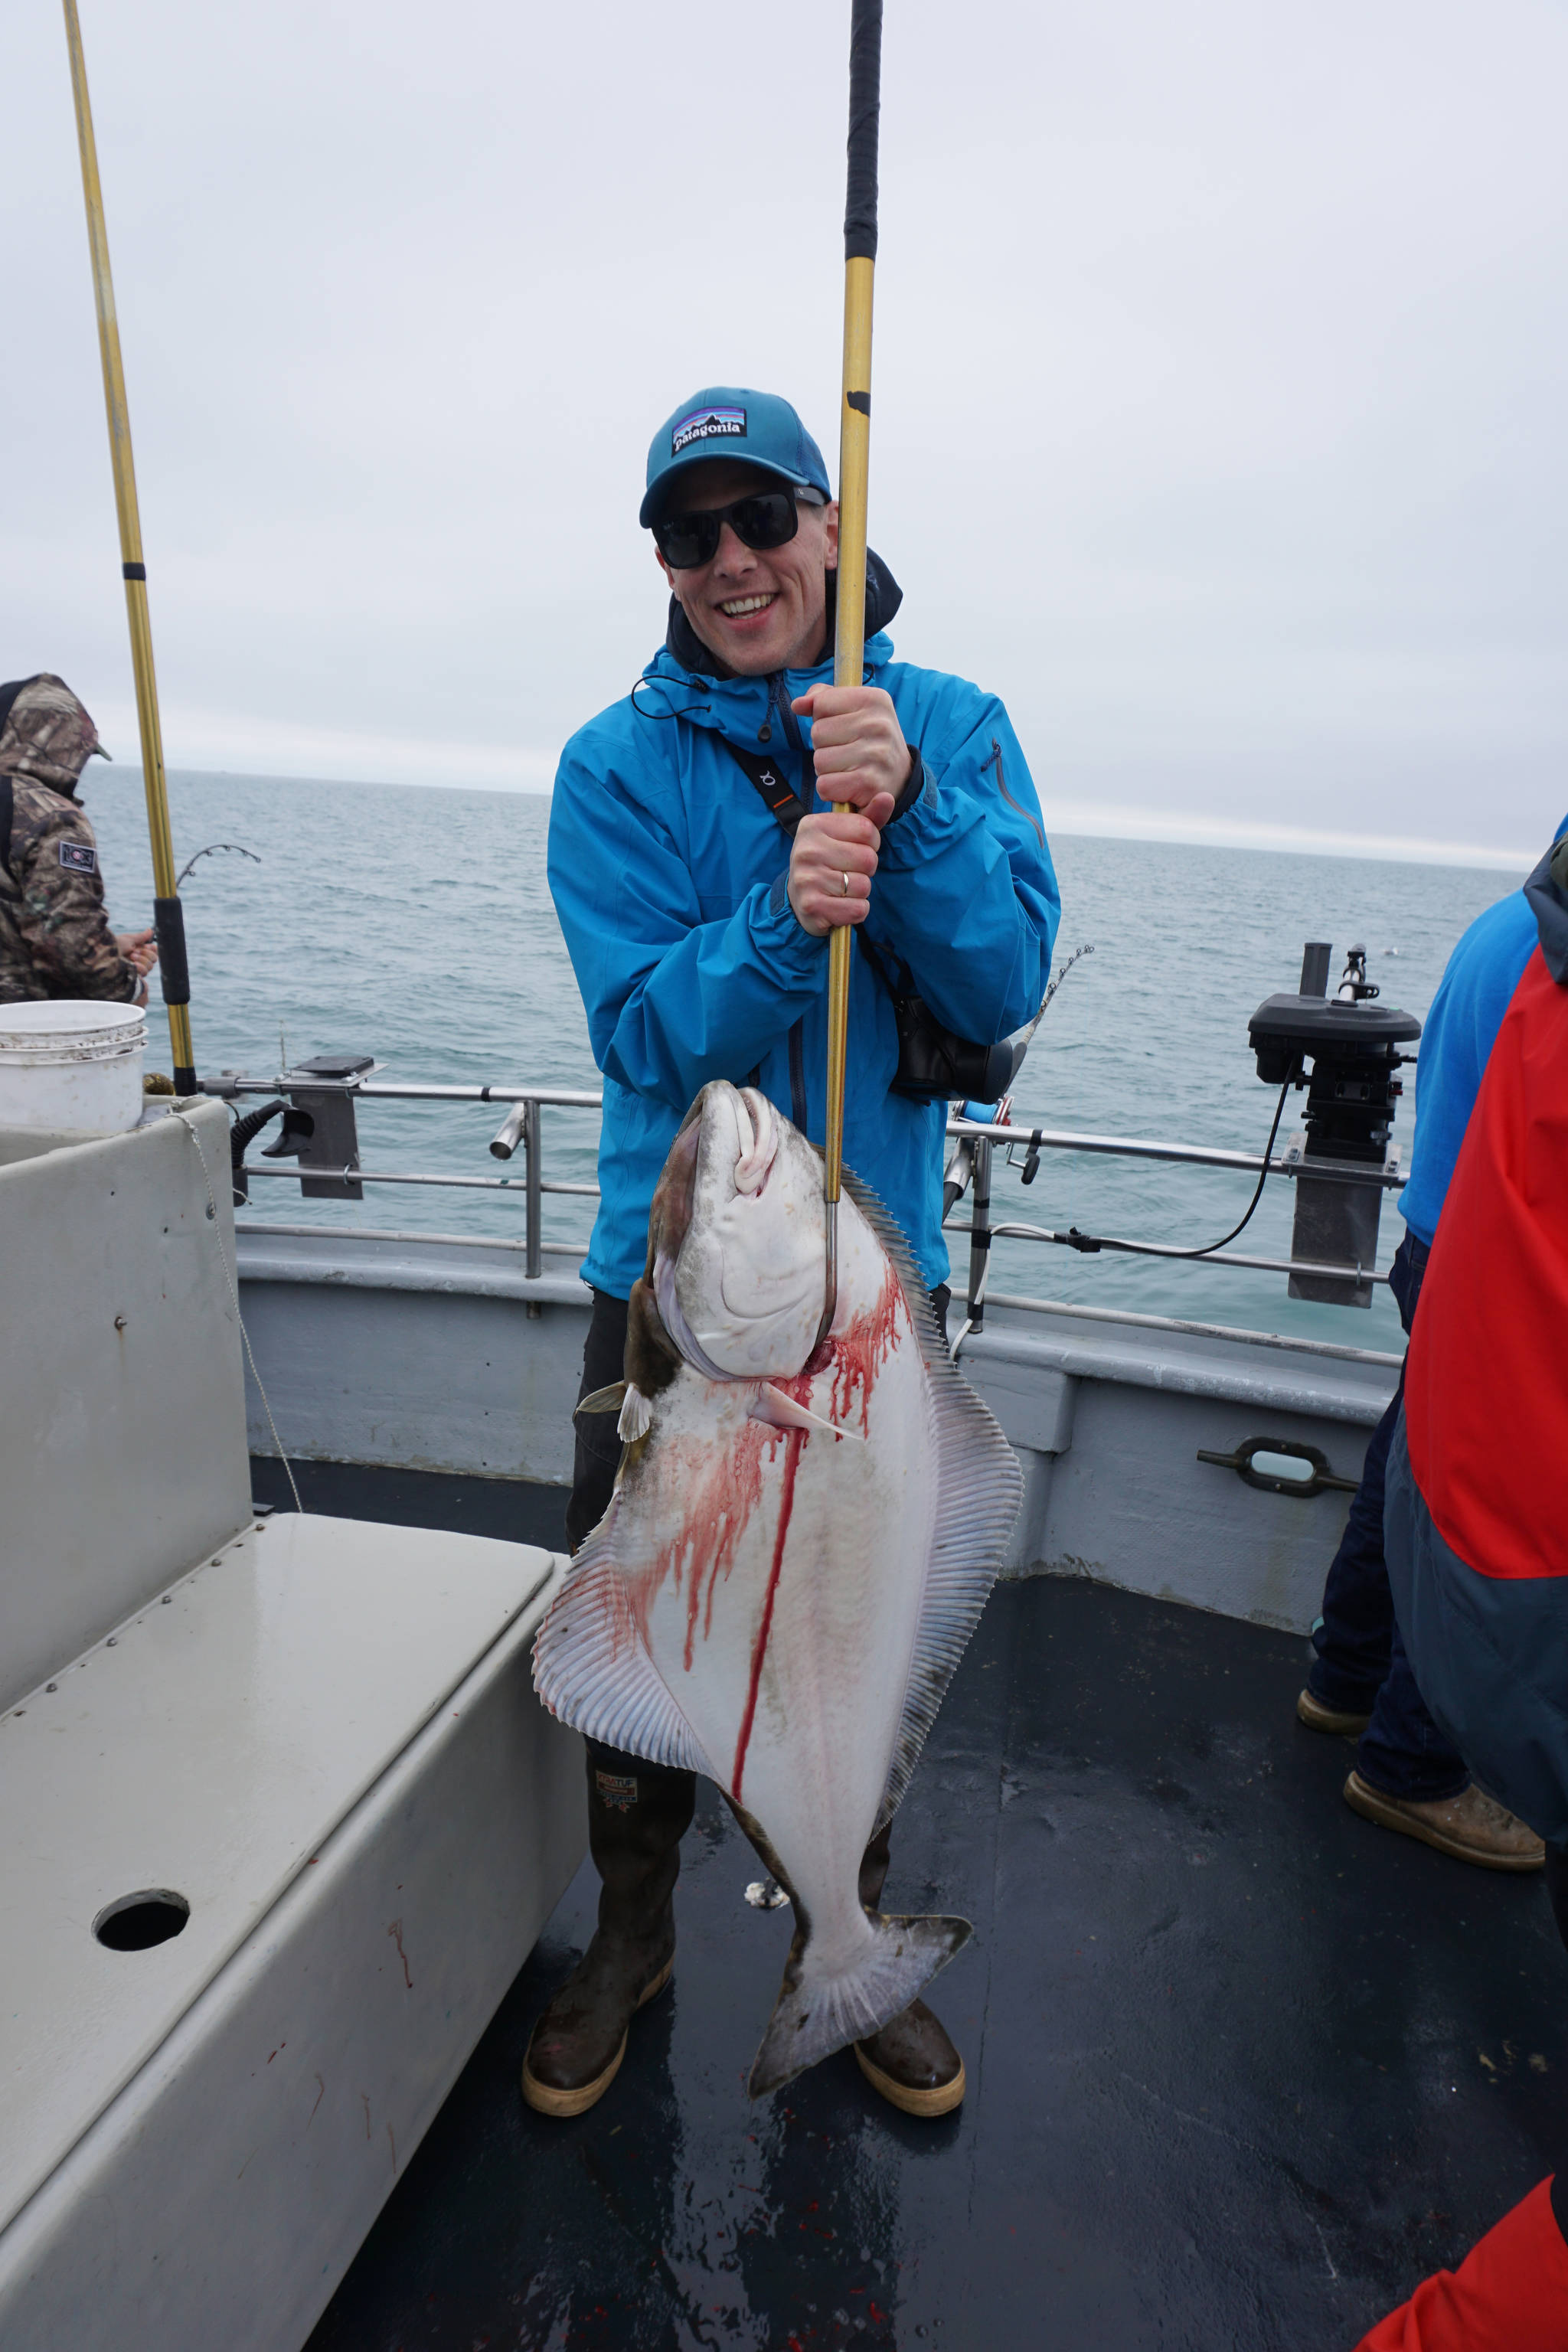 Learning from the tourists: halibut fishing is a heck of a lot of fun